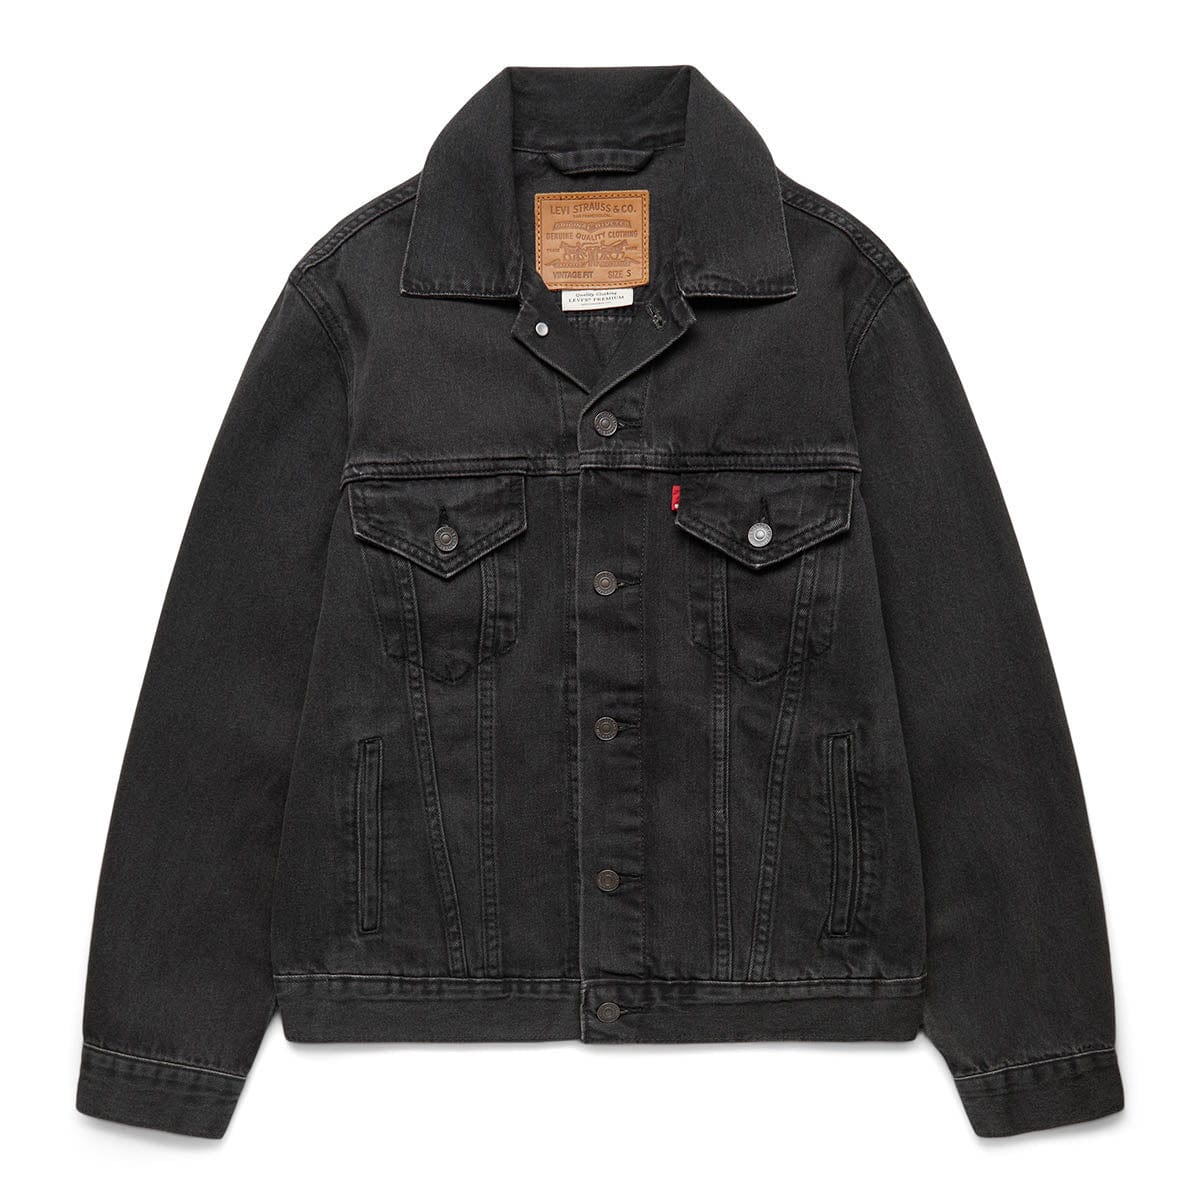 Levi's Outerwear VINTAGE RELAXED FIT TRUCKER